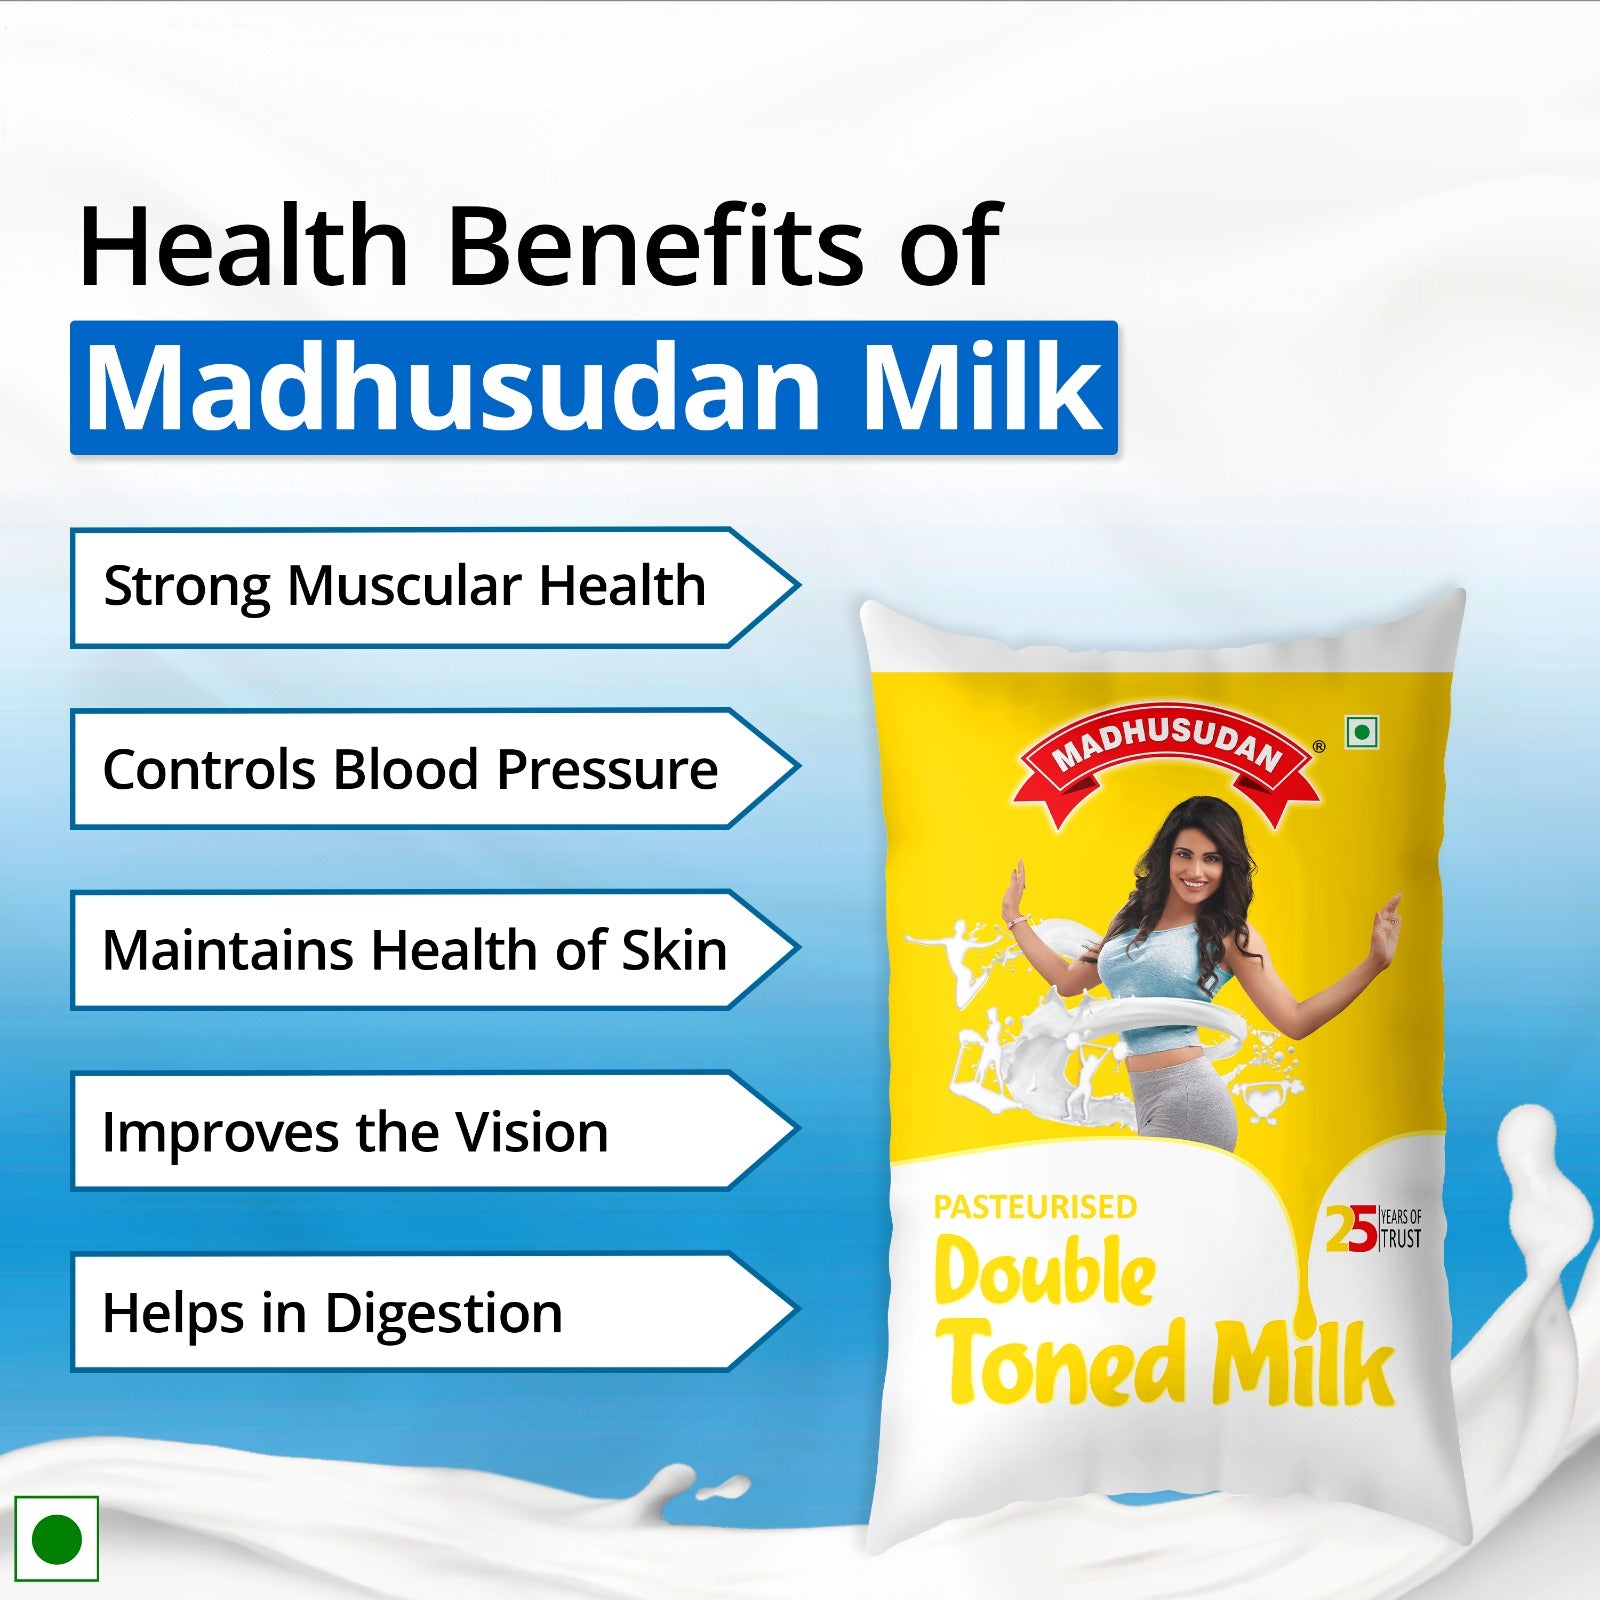 Exploring the Health and Nutrition Benefits of Madhusudan Milk